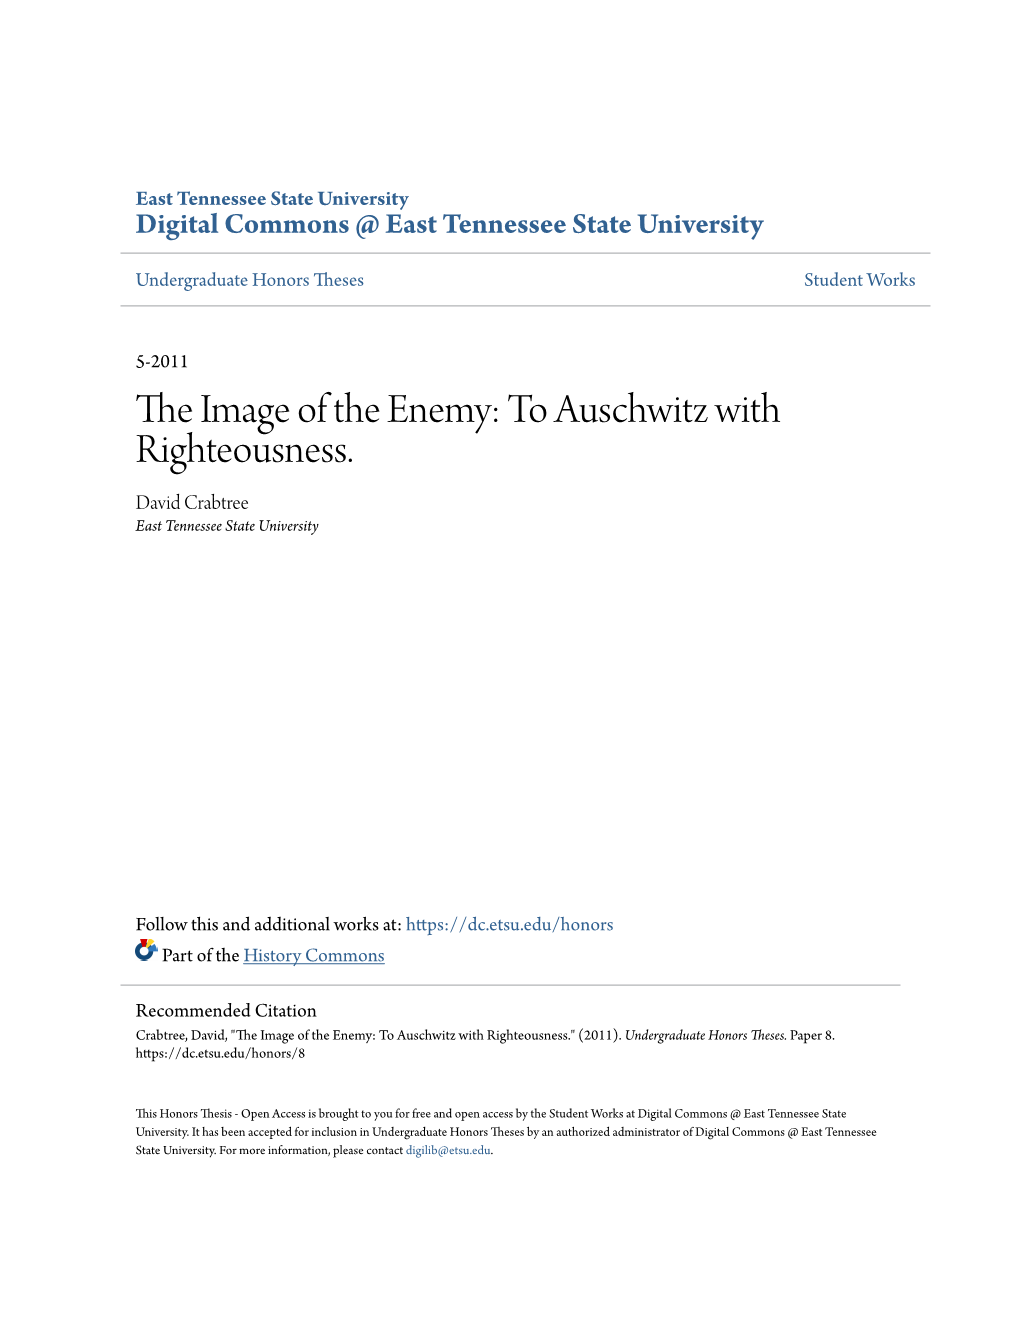 The Image of the Enemy: to Auschwitz with Righteousness